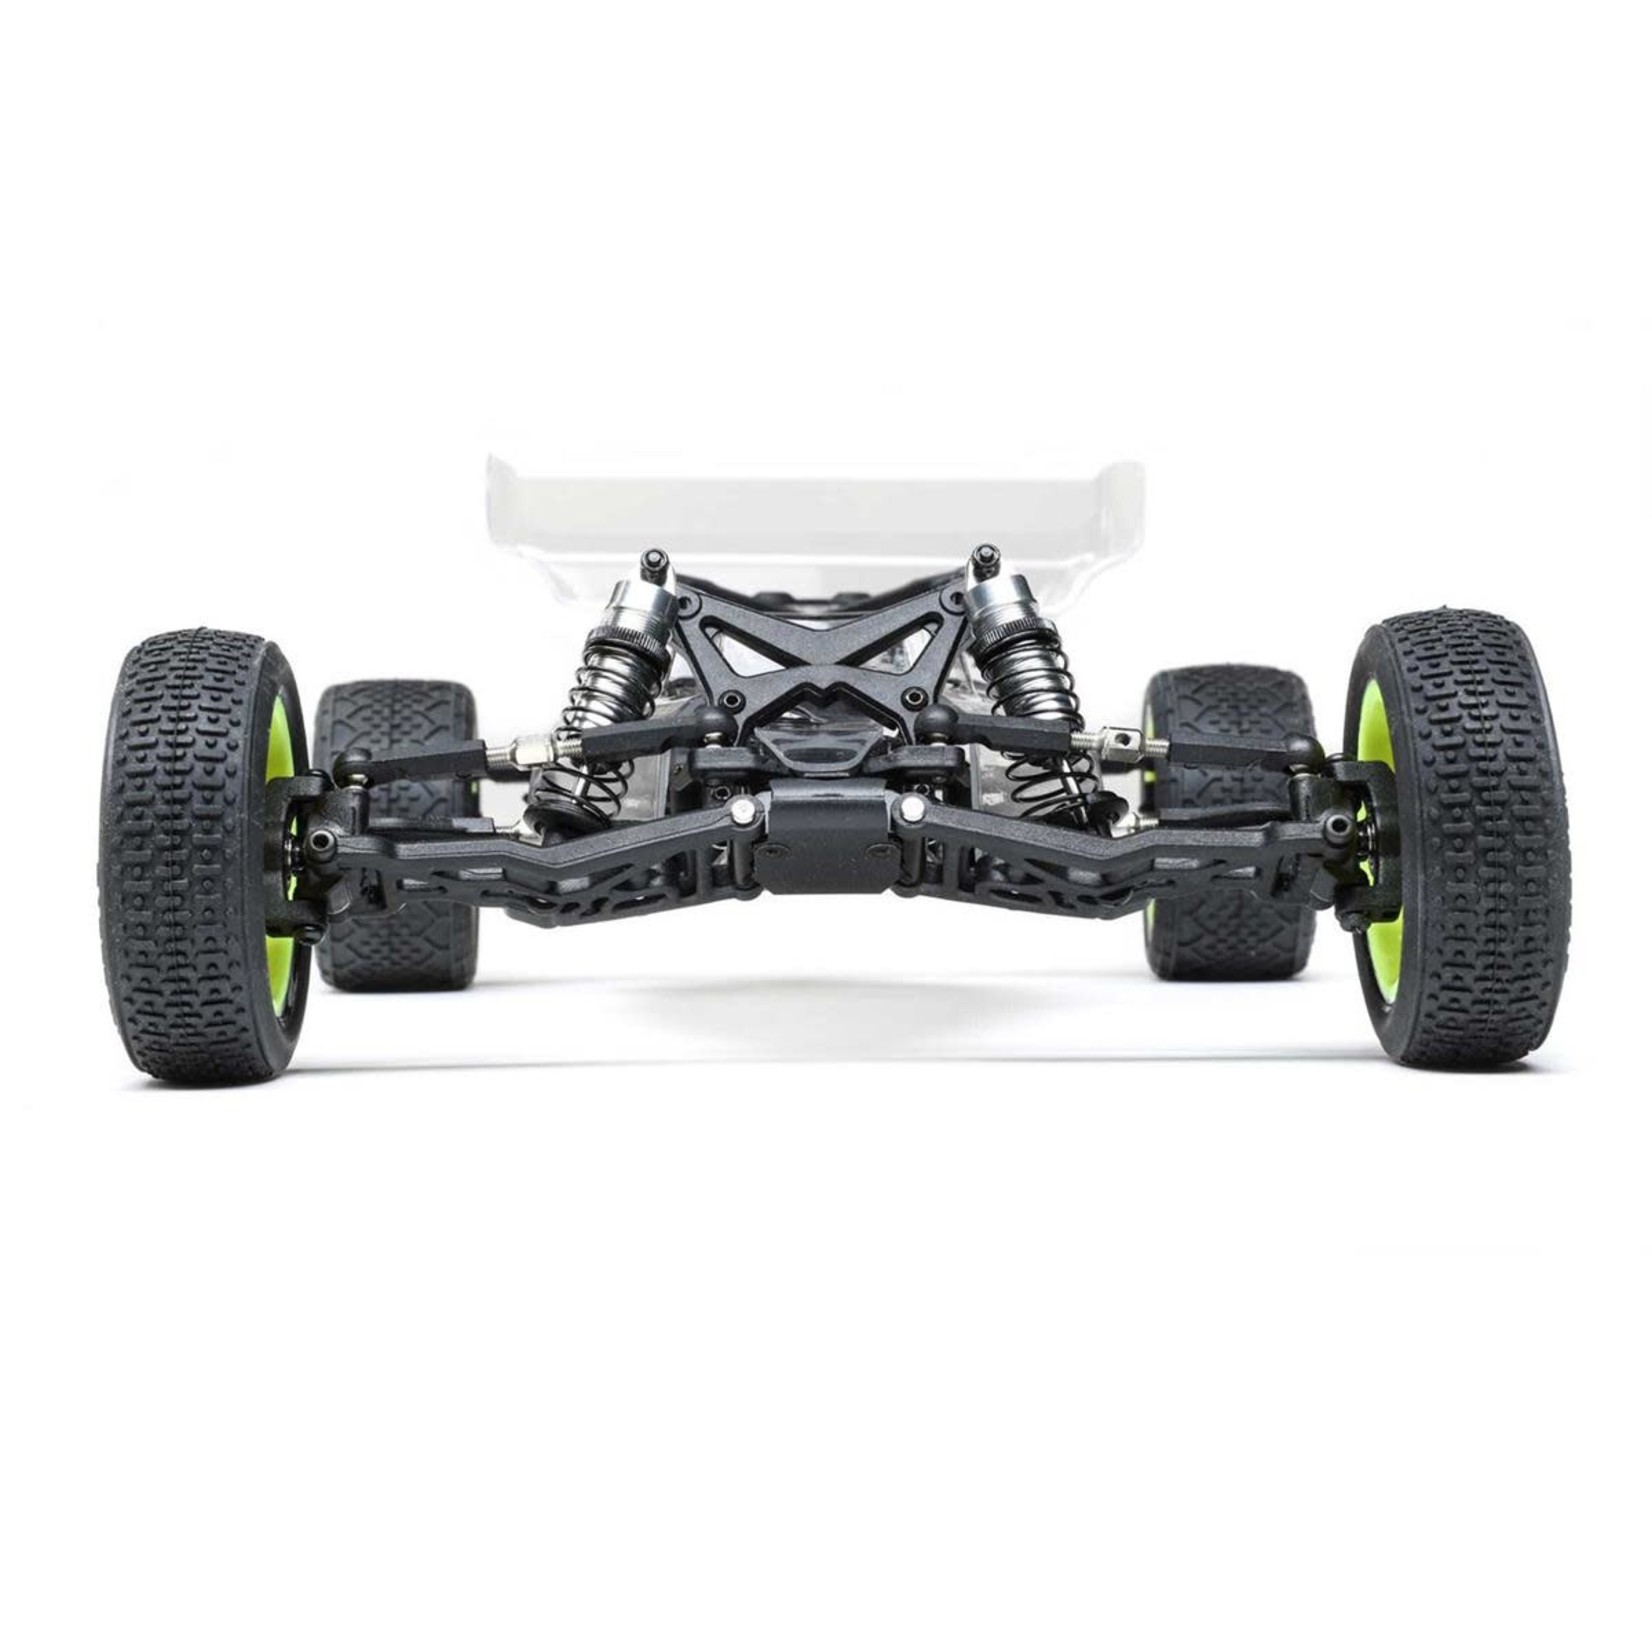 Losi Losi Mini-B 1/16 Pro 2WD Buggy Roller Kit (Clear) #LOS01025